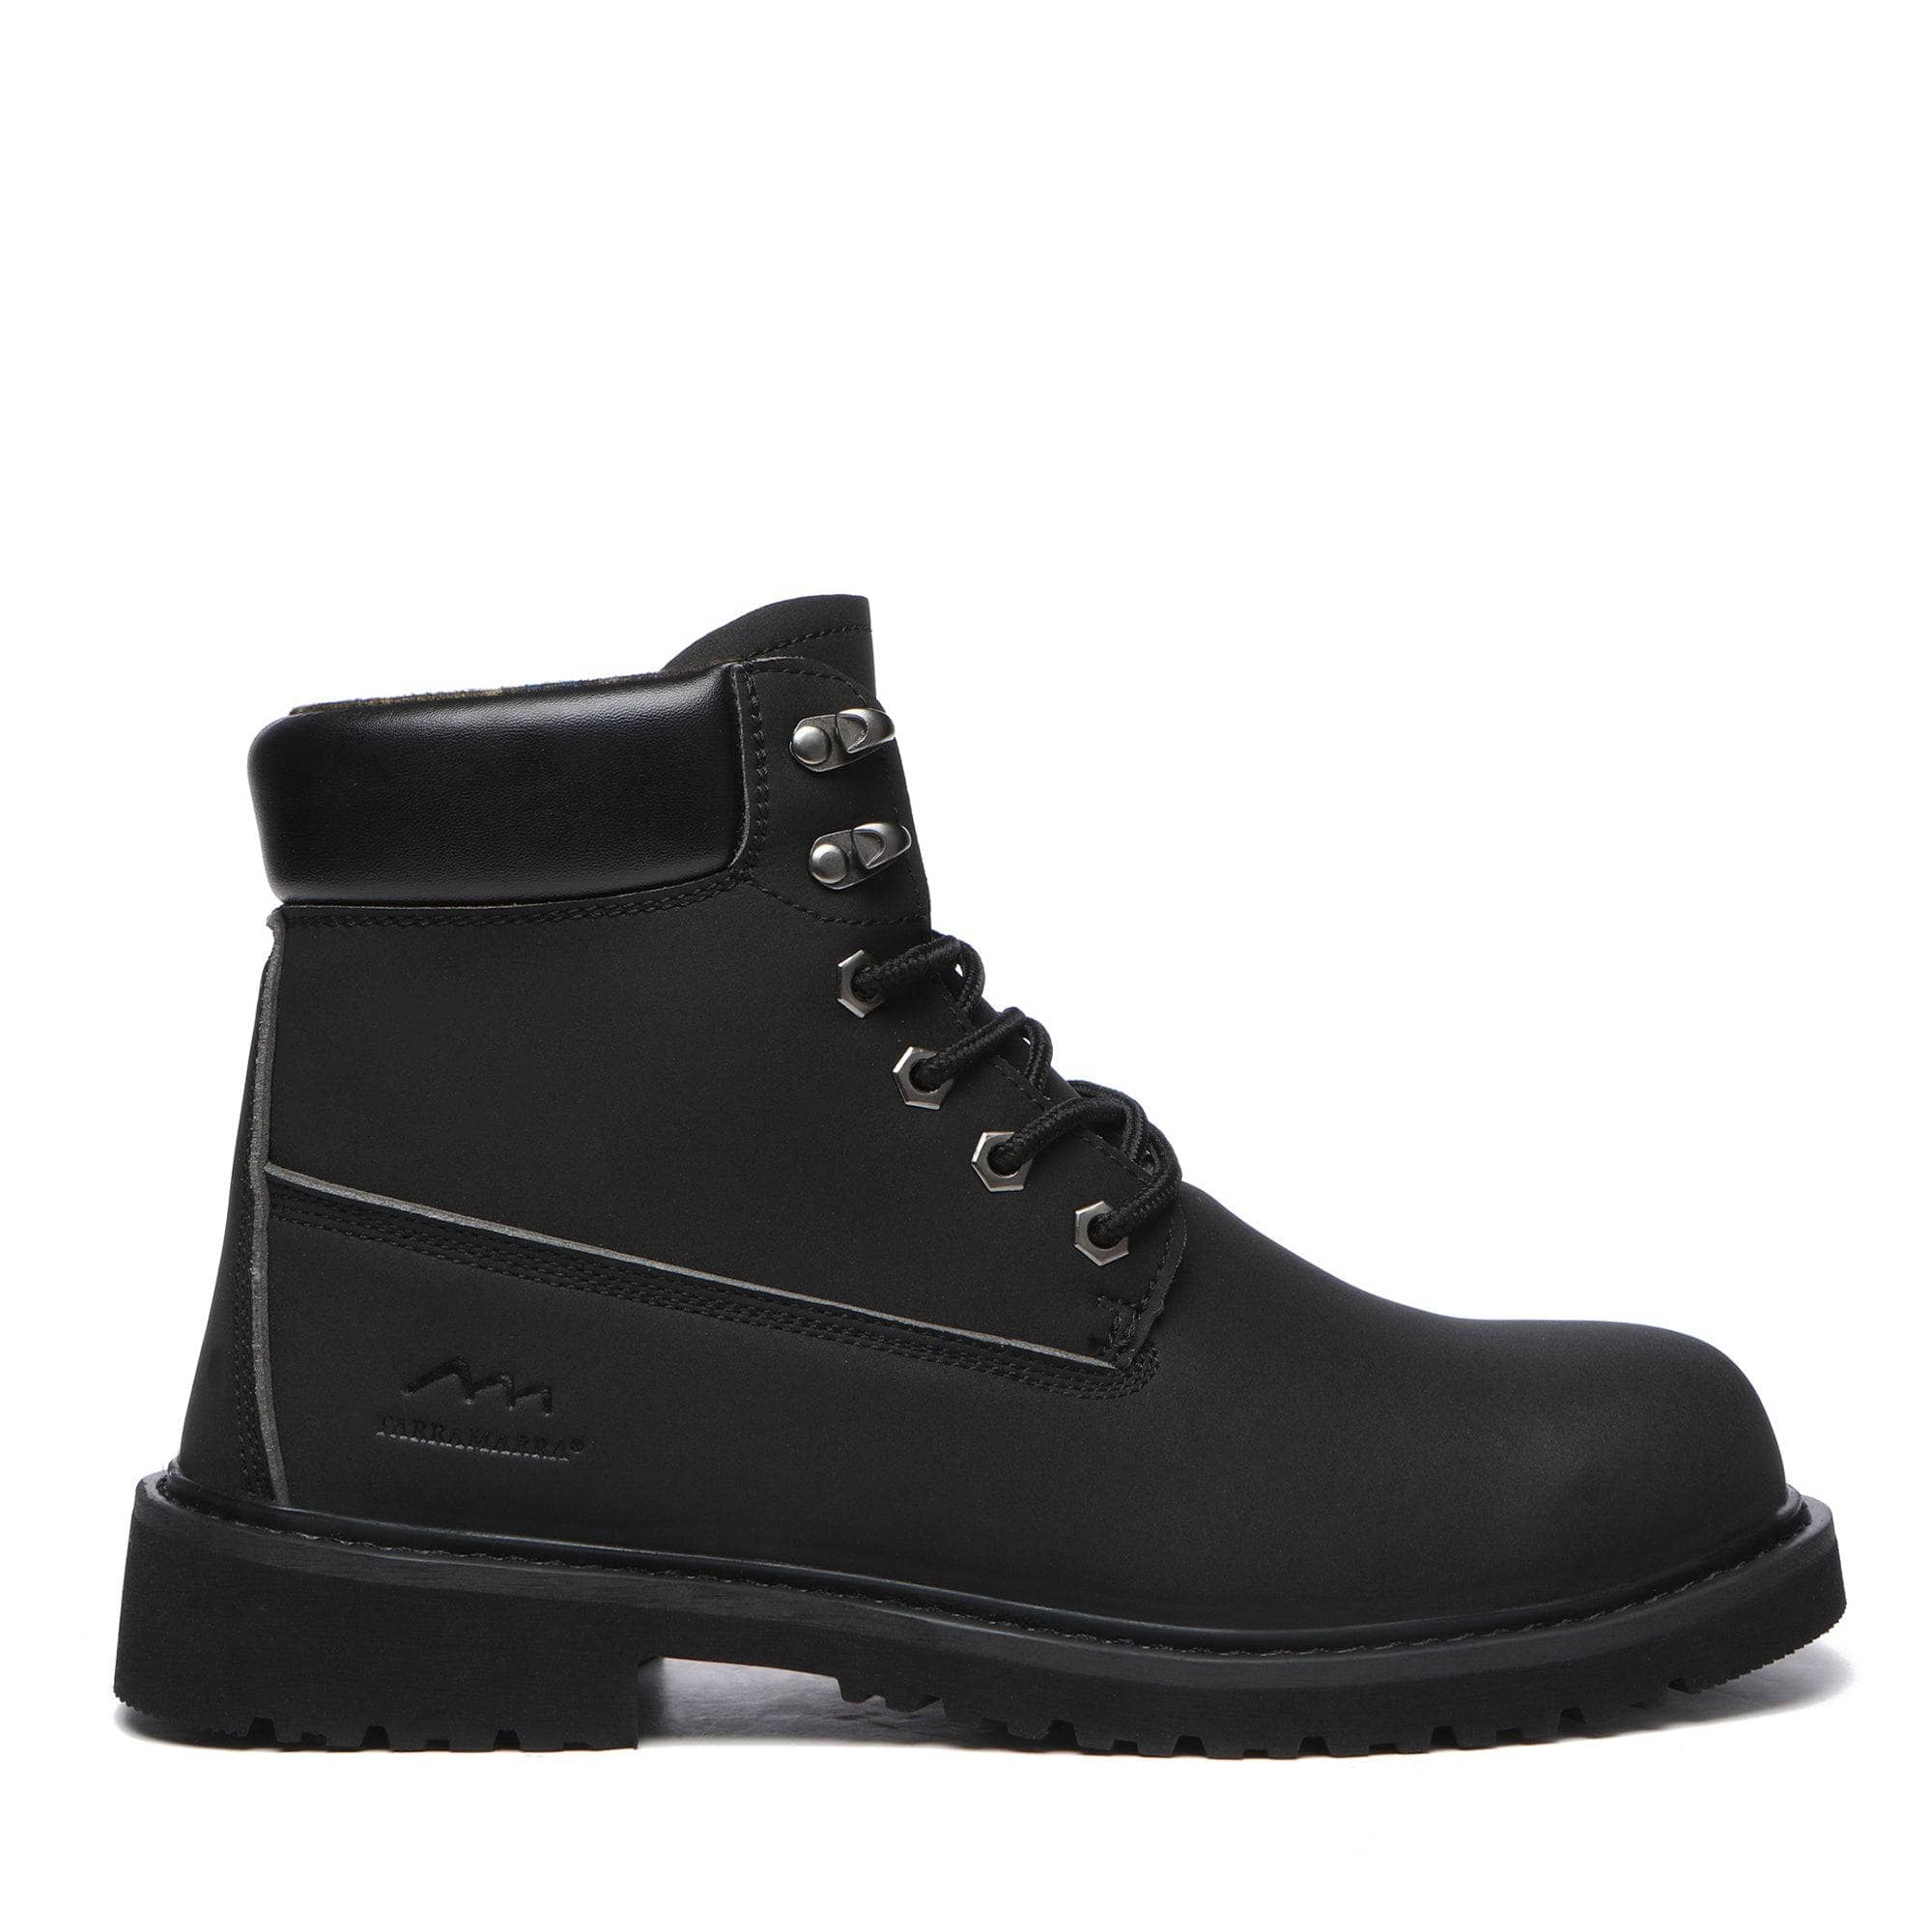 Outdoor Ugg Boots - Yaman Lace Up Boots - Original UGG Australia Classic